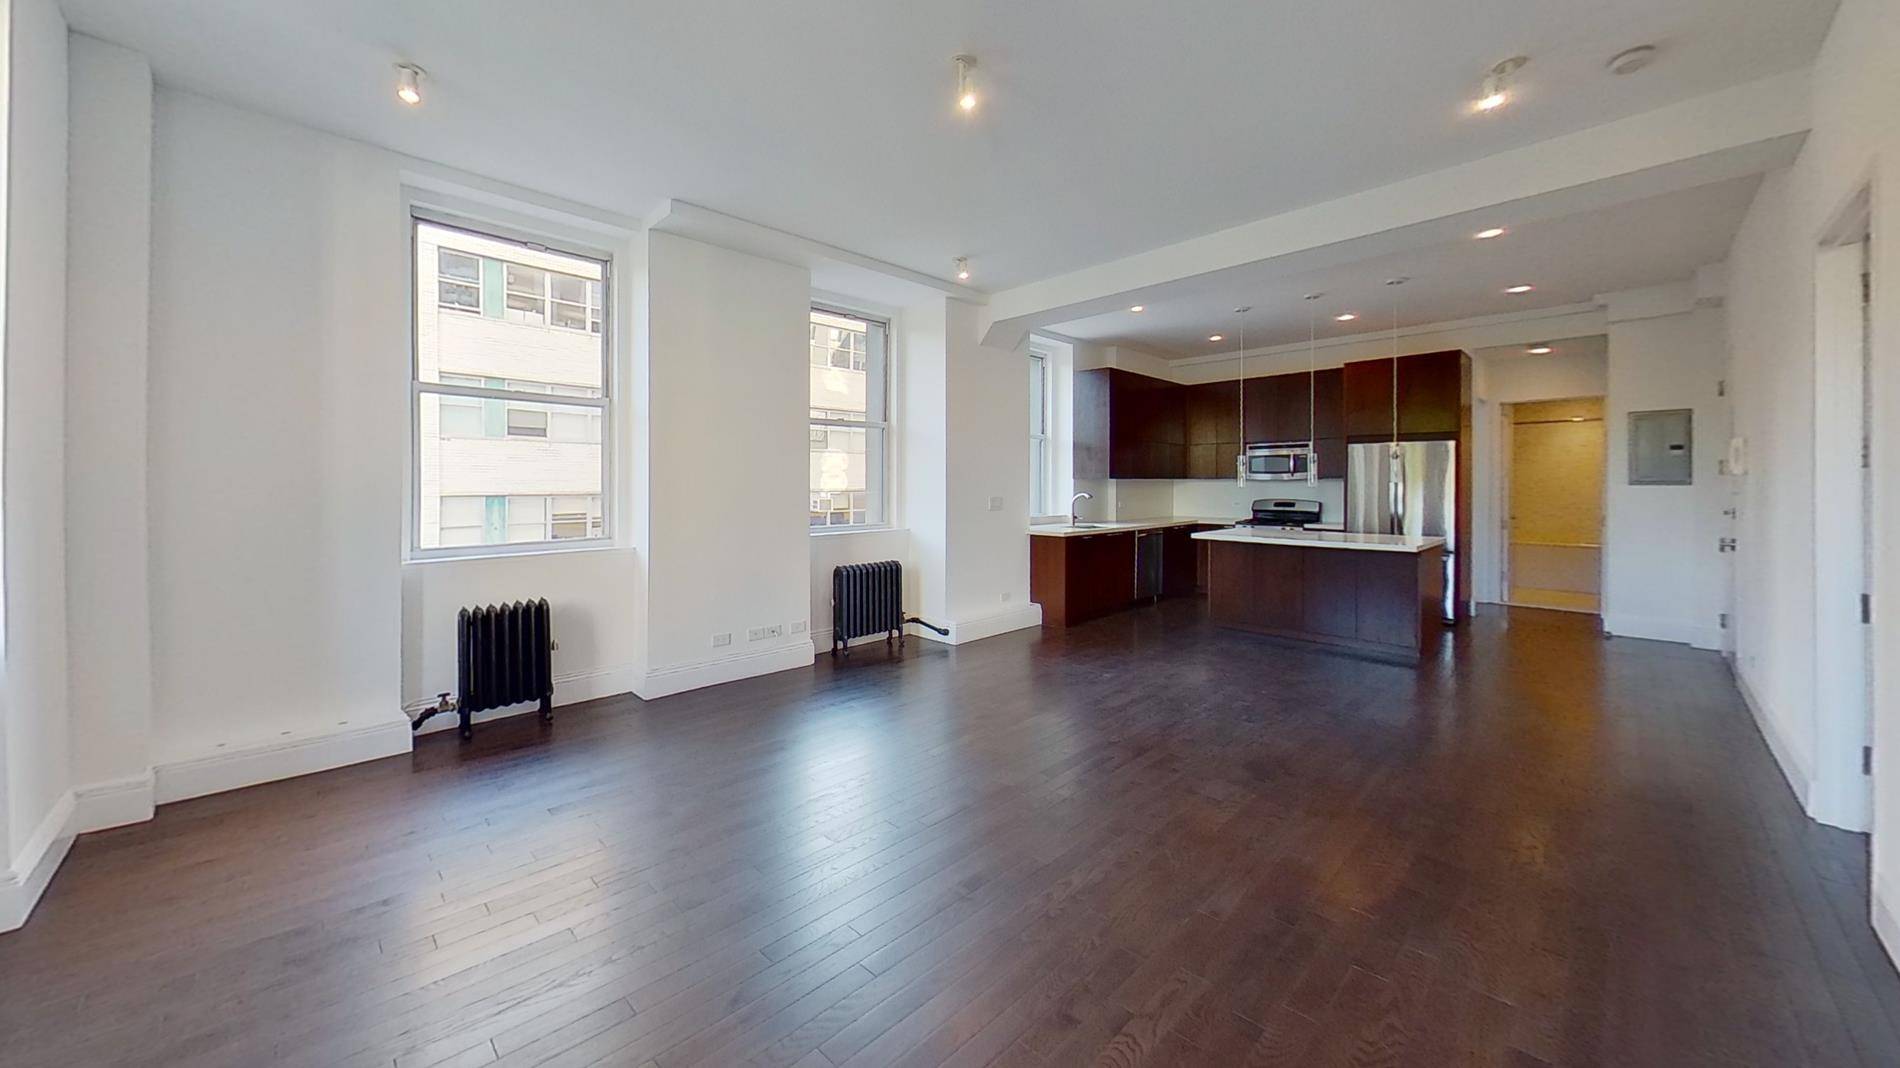 Sleek two bedroom loft directly facing Union Square Park.